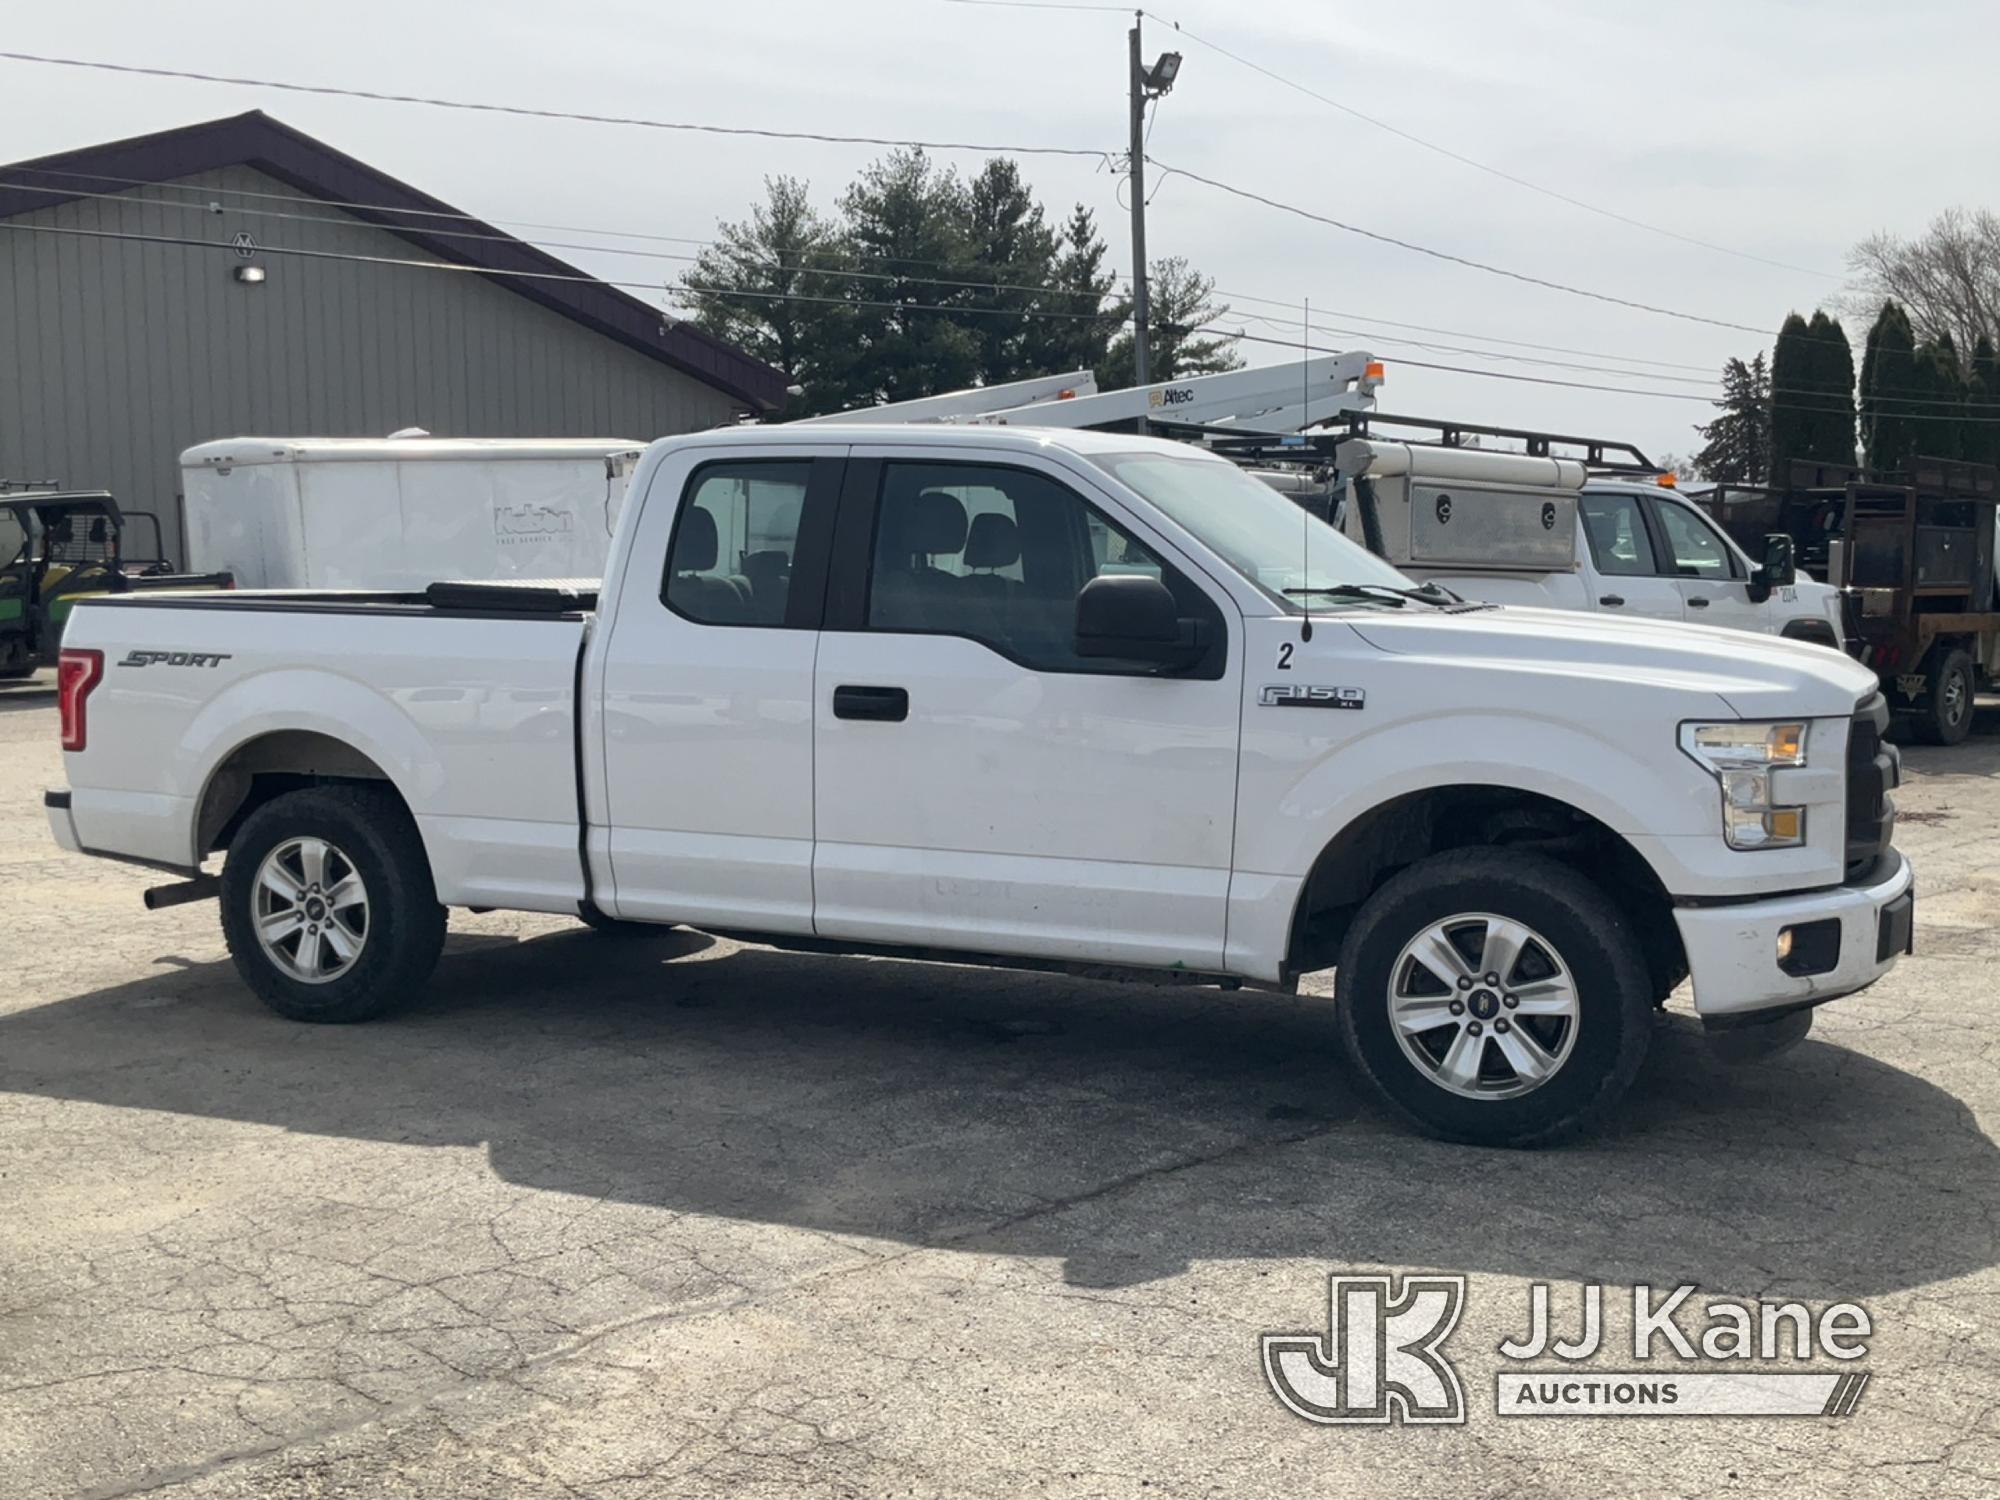 (South Beloit, IL) 2015 Ford F150 Extended-Cab Pickup Truck Runs, Moves, Front Bumper Damage